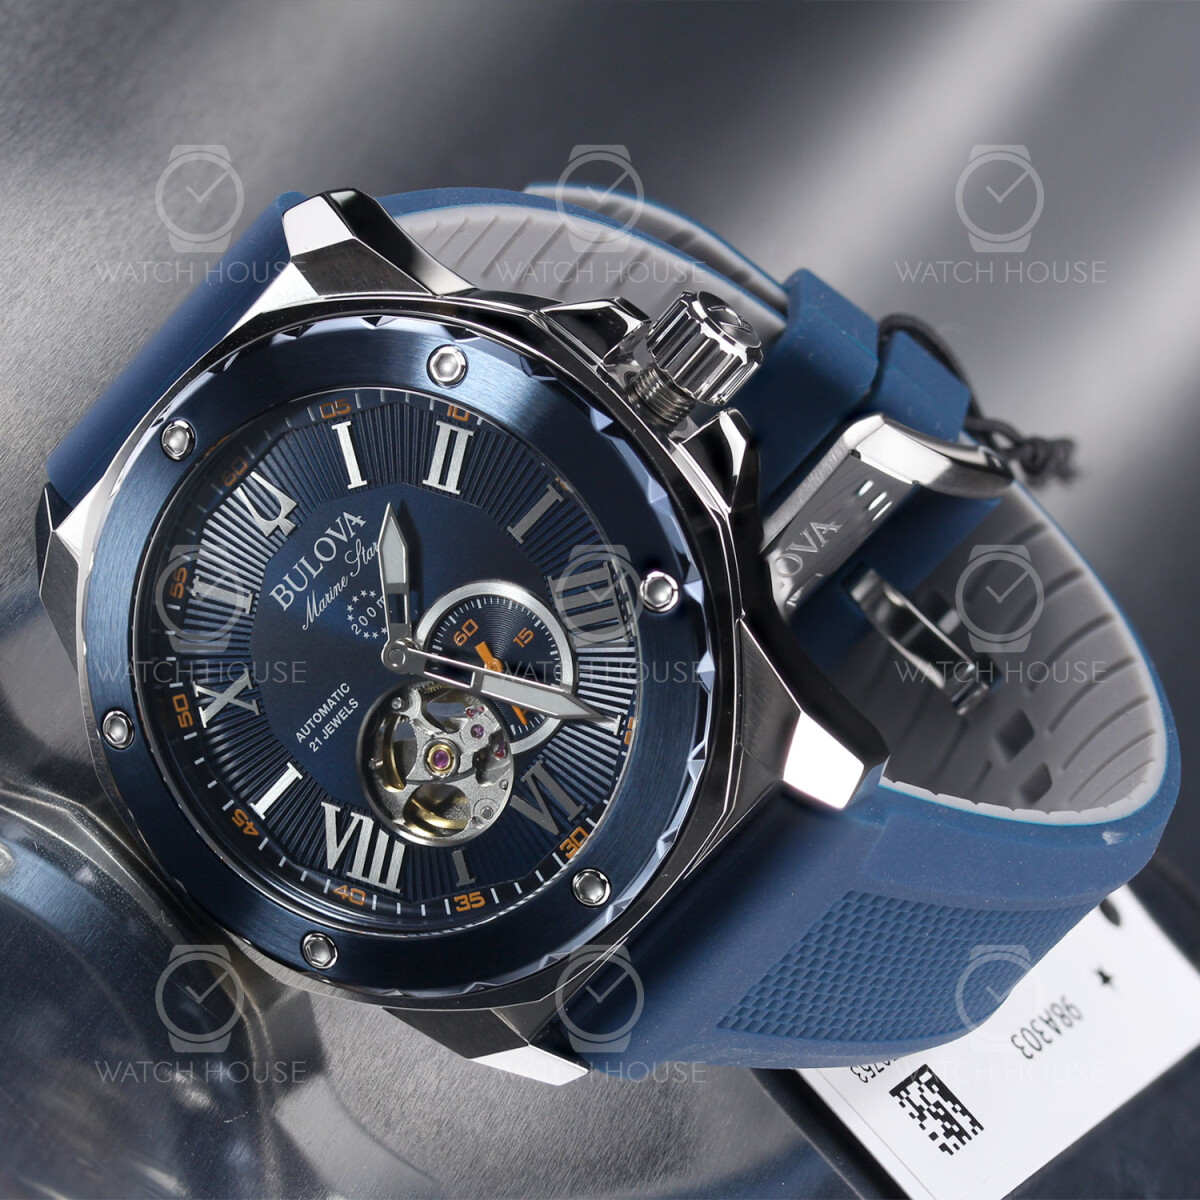 Bulova Marine Star Automatic 98A303 decentralized seconds in navy blue